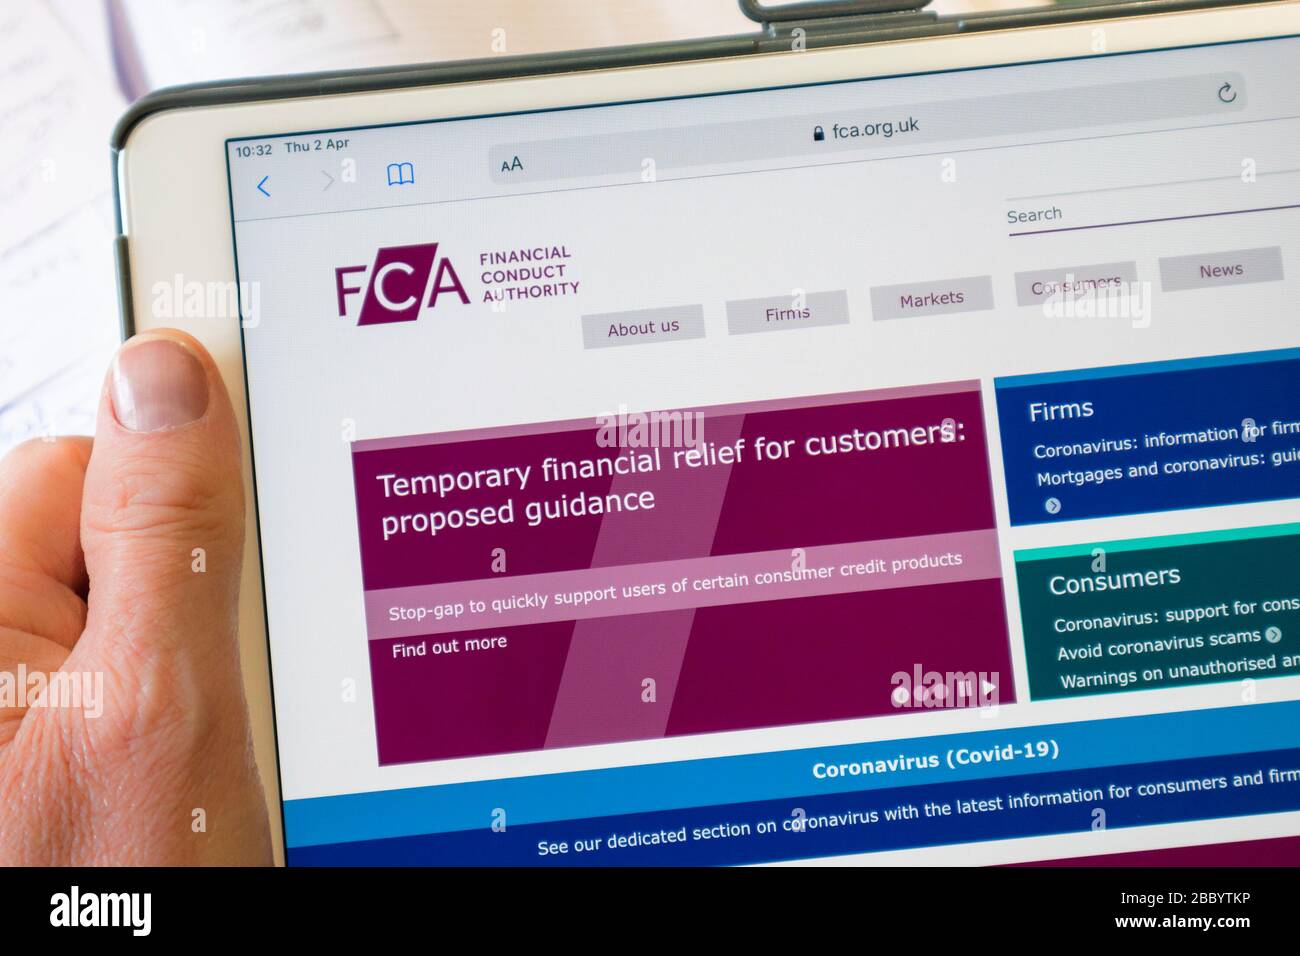 fca financial conduct authority website viewed on an ipad, uk Stock Photo